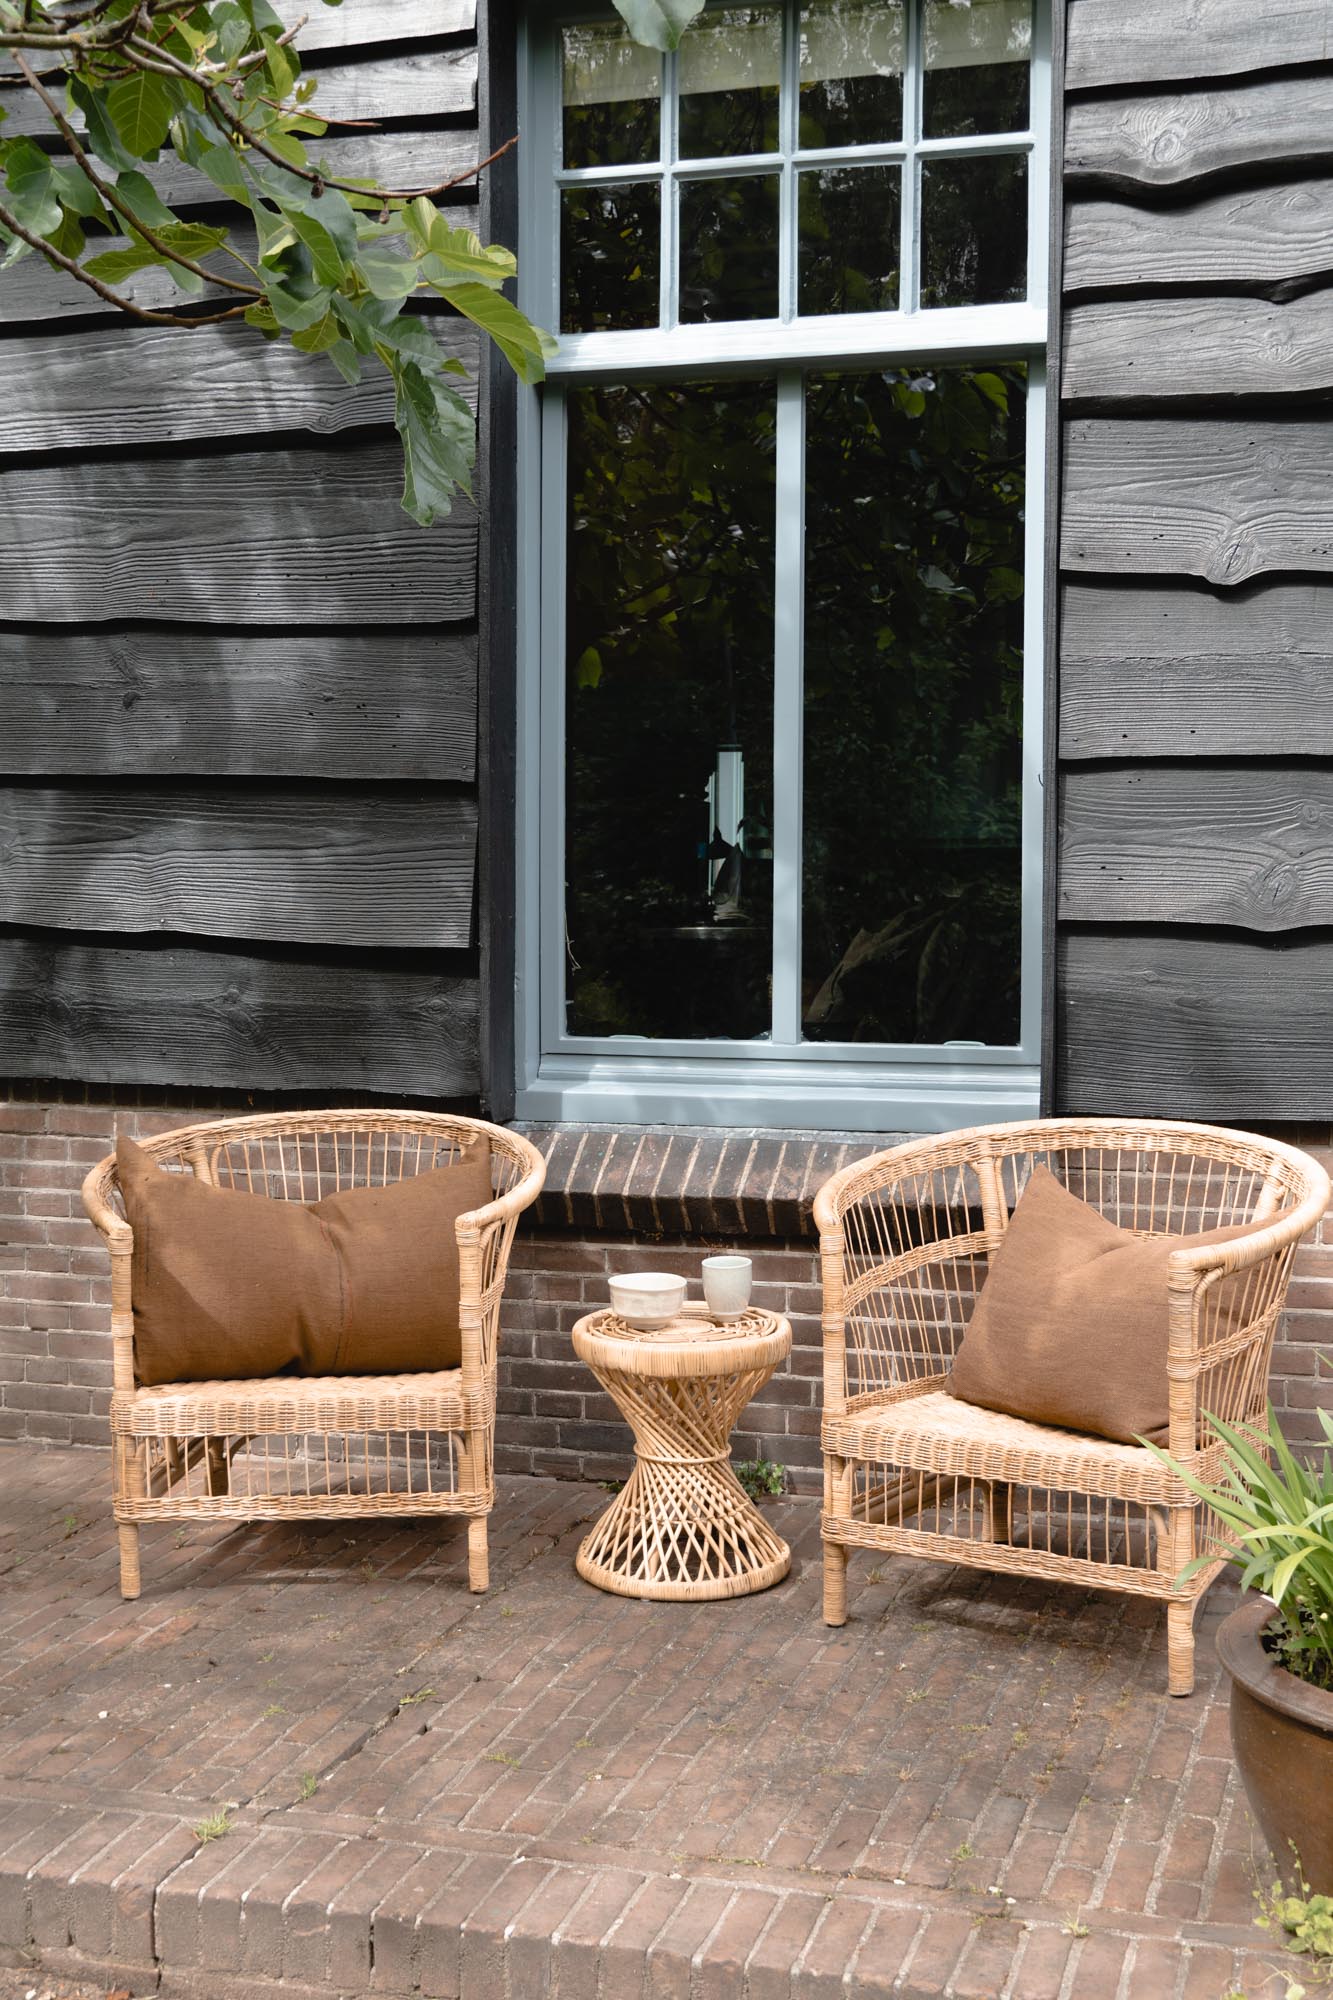 Rattan Lounge Set by Tine K Home set in front of a lovely wooden panelling home.